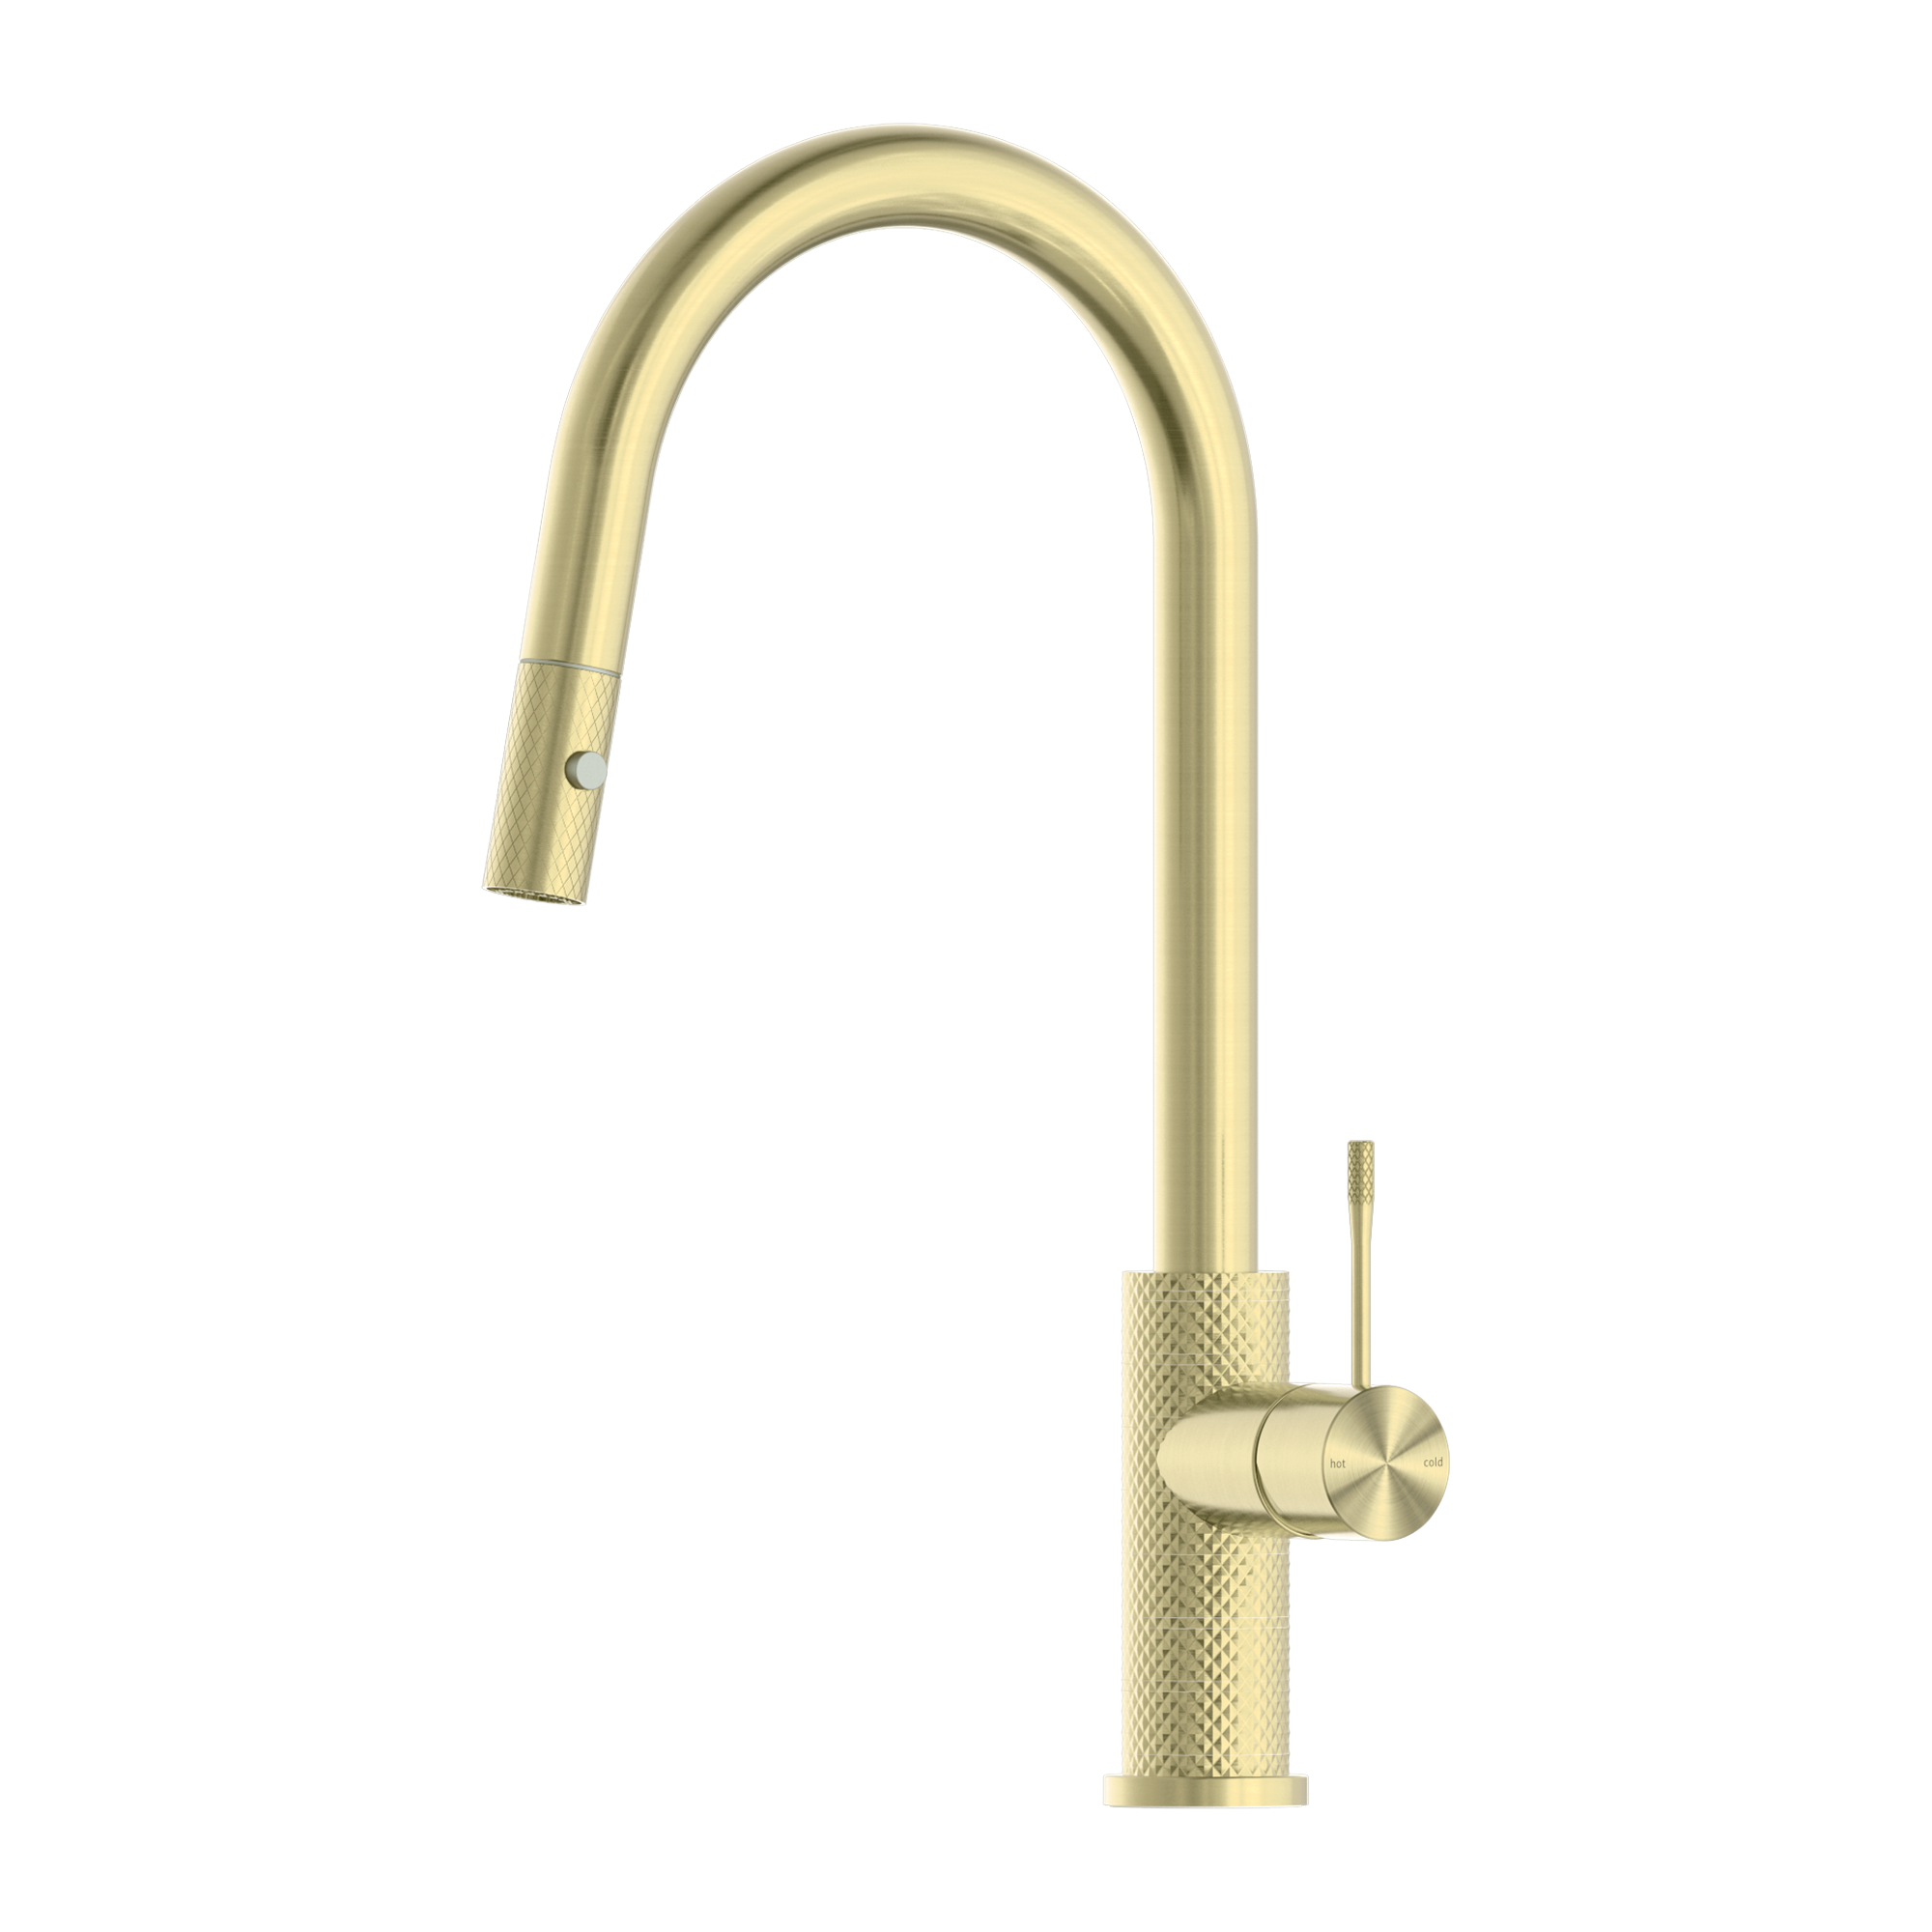 Opal pull out sink mixer with vegie spray function